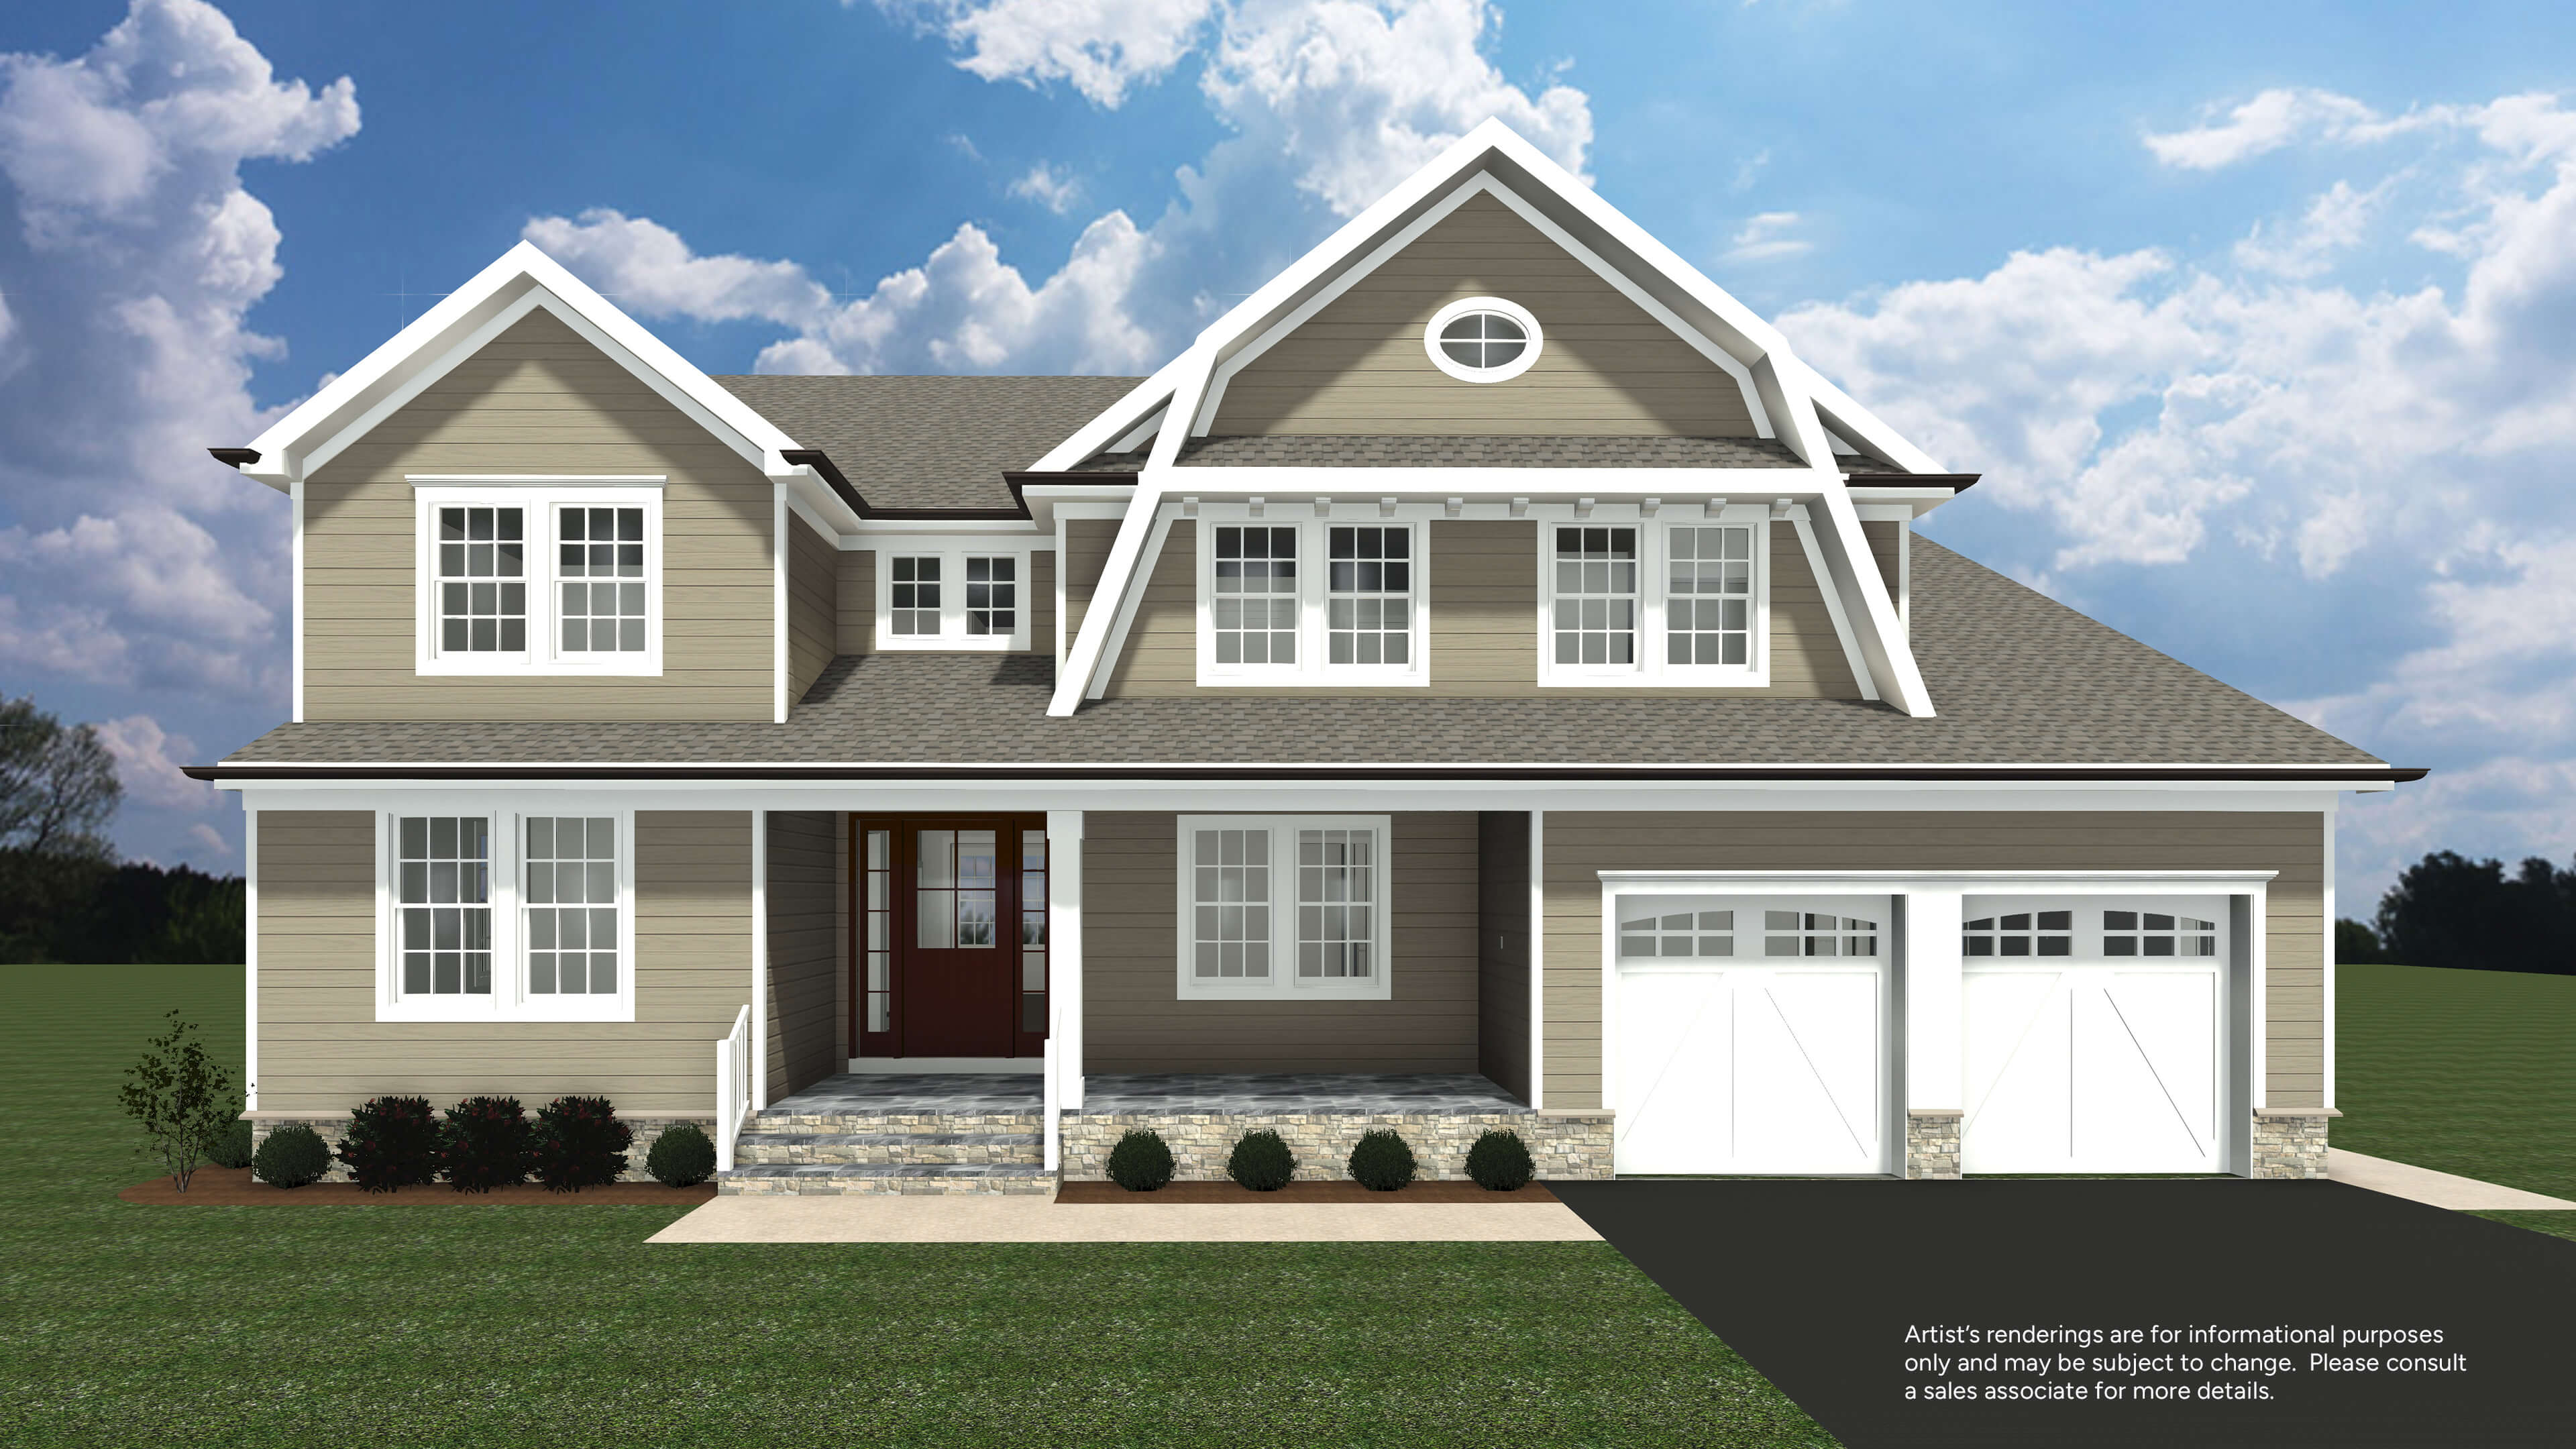 A Collection of New Homes in Brielle rendering